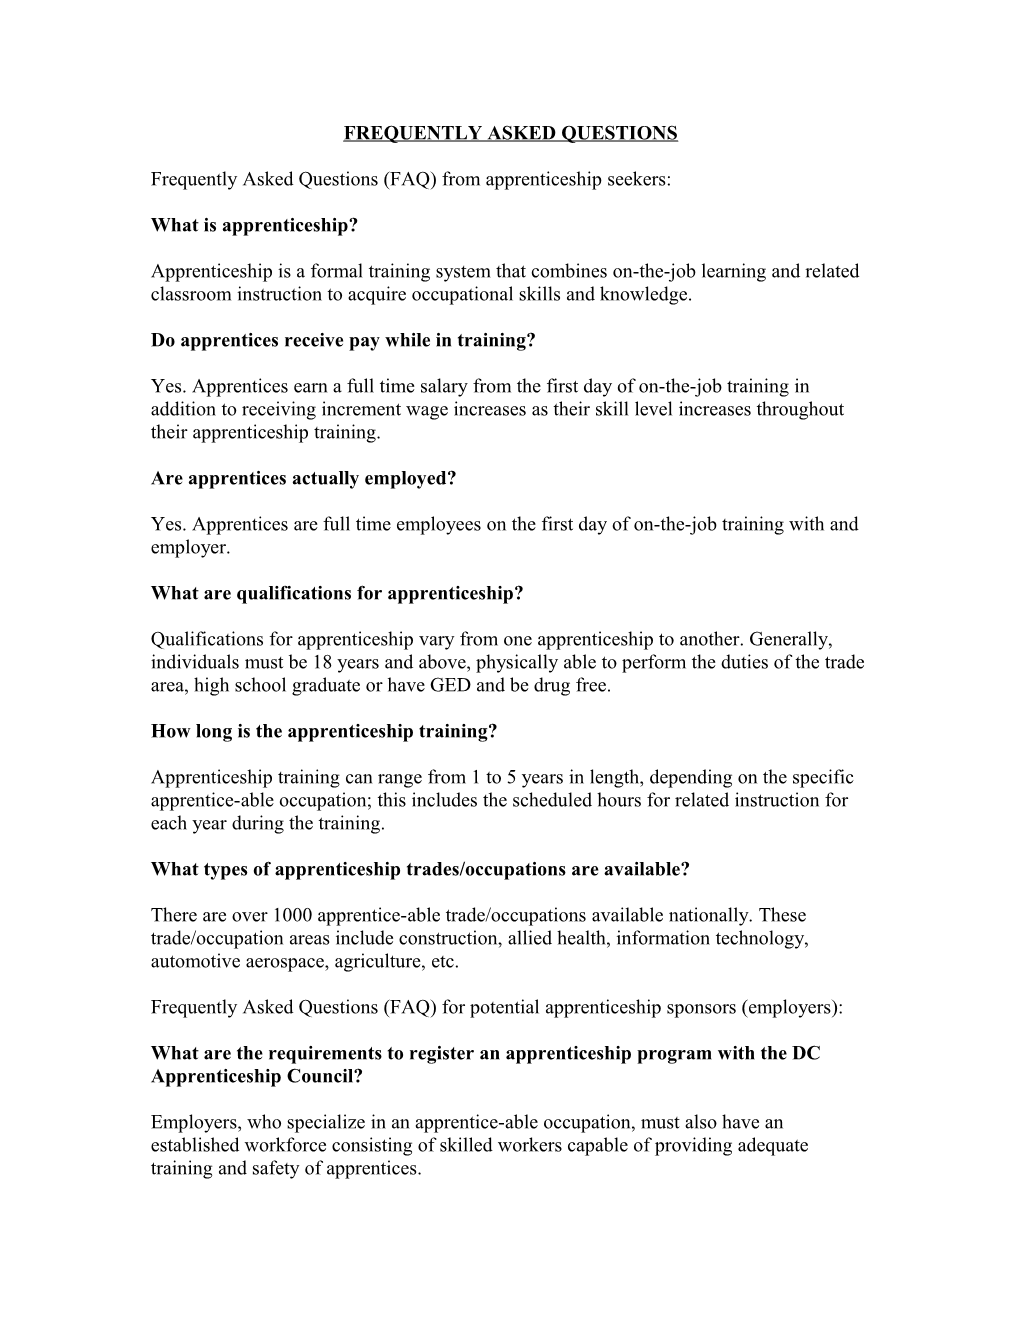 Frequently Asked Questions (FAQ) from Potential Apprentices